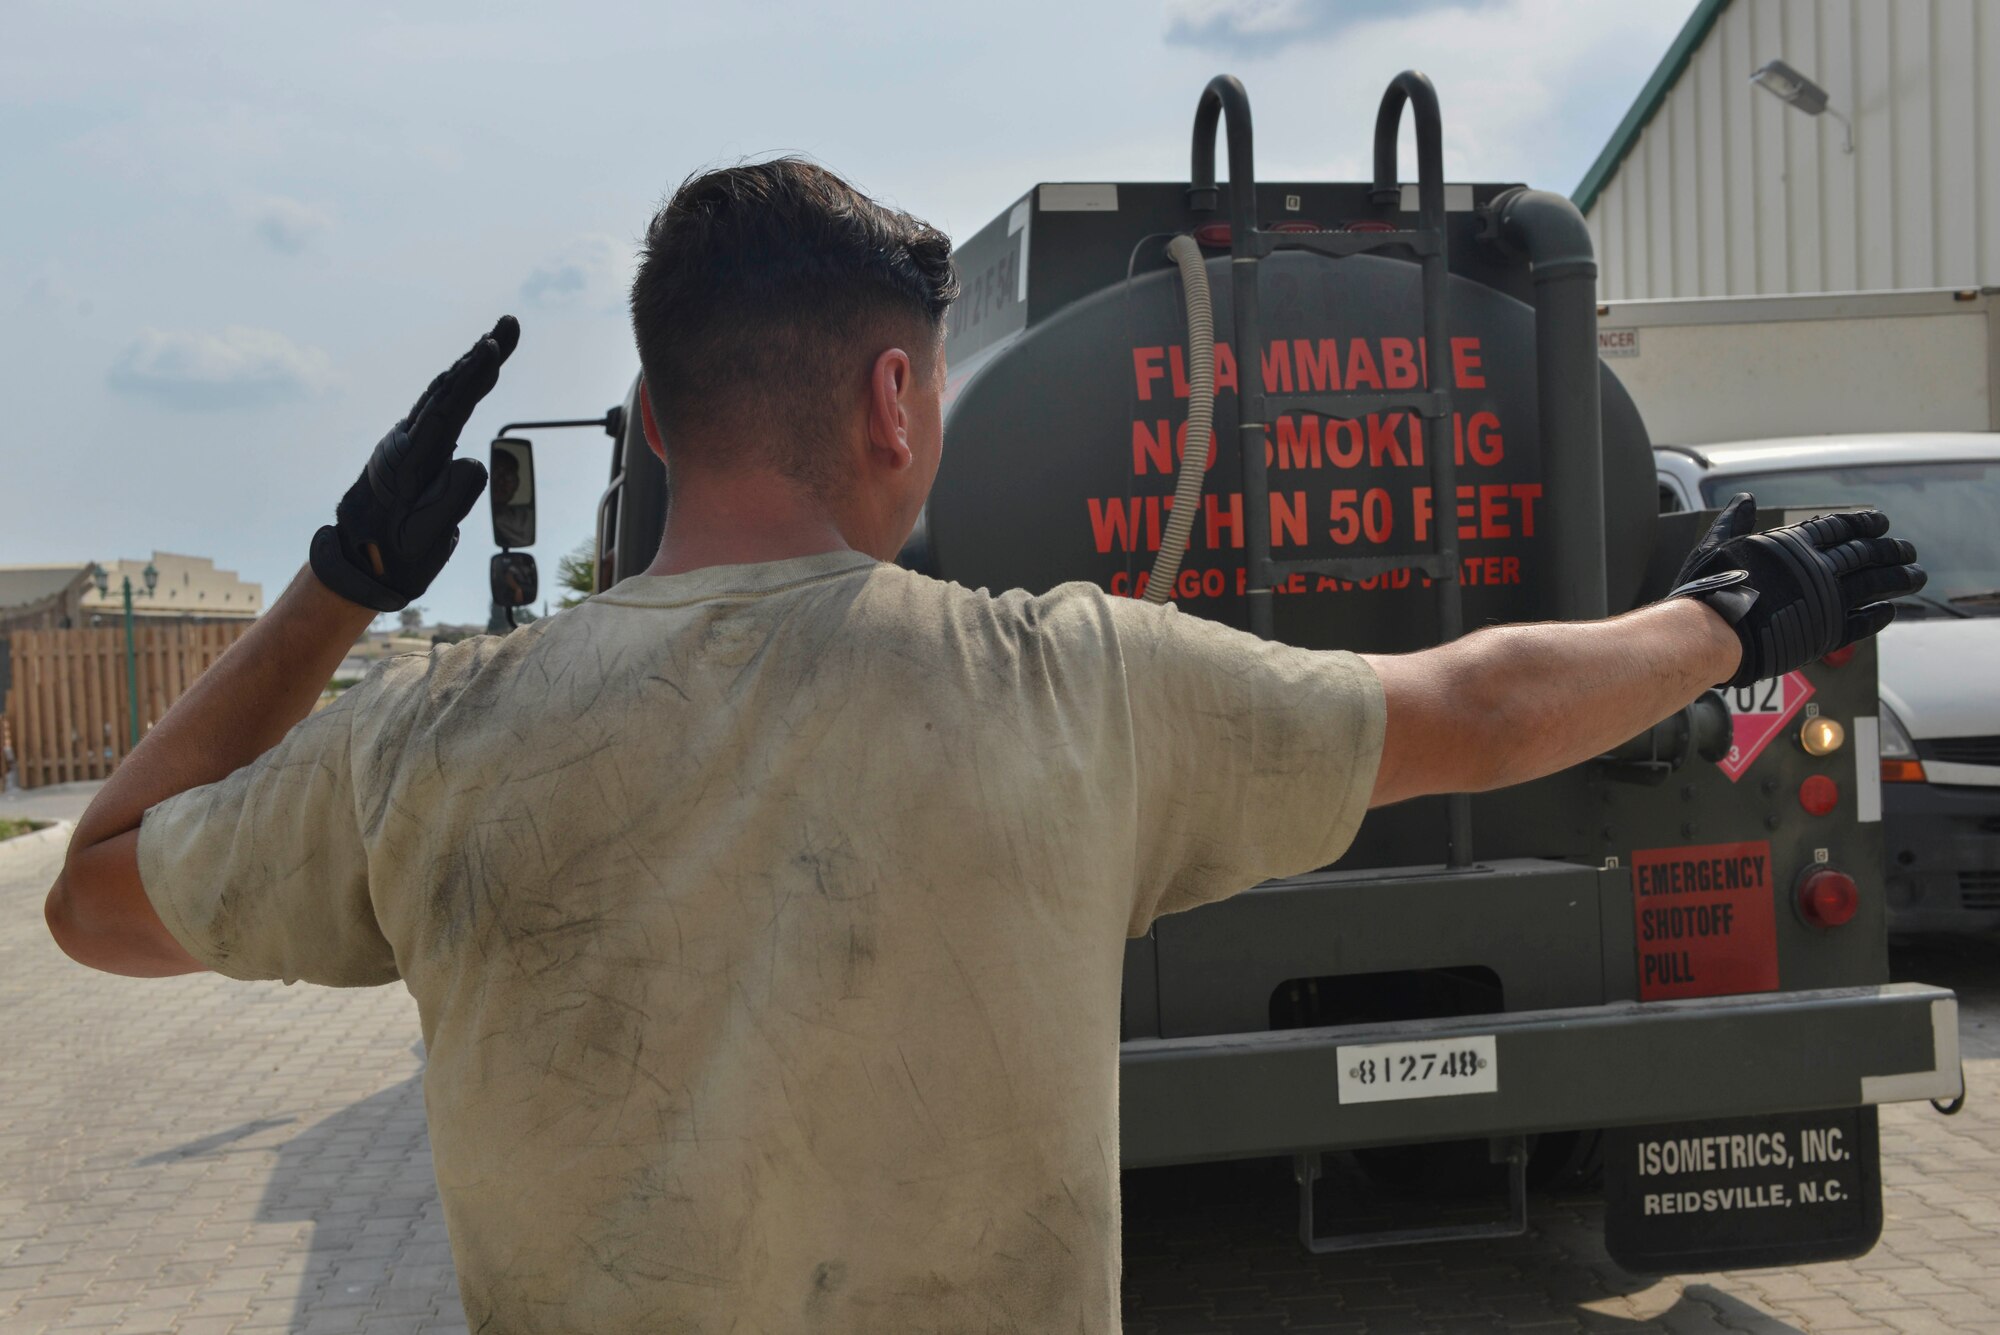 U.S. Air Force Airman 1st Class Trenton Beard, 39th Logistics Readiness Squadron (LRS) fuels specialist, guides Airman 1st Class Eduardo Reyes, 39th LRS fuels specialist, as he backs a fuel truck July 19, 2016, at Incirlik Air Base, Turkey. Beard and Reyes went around base refueling generators, enabling power to base facilities. (U.S. Air Force photo by Senior Airman John Nieves Camacho)